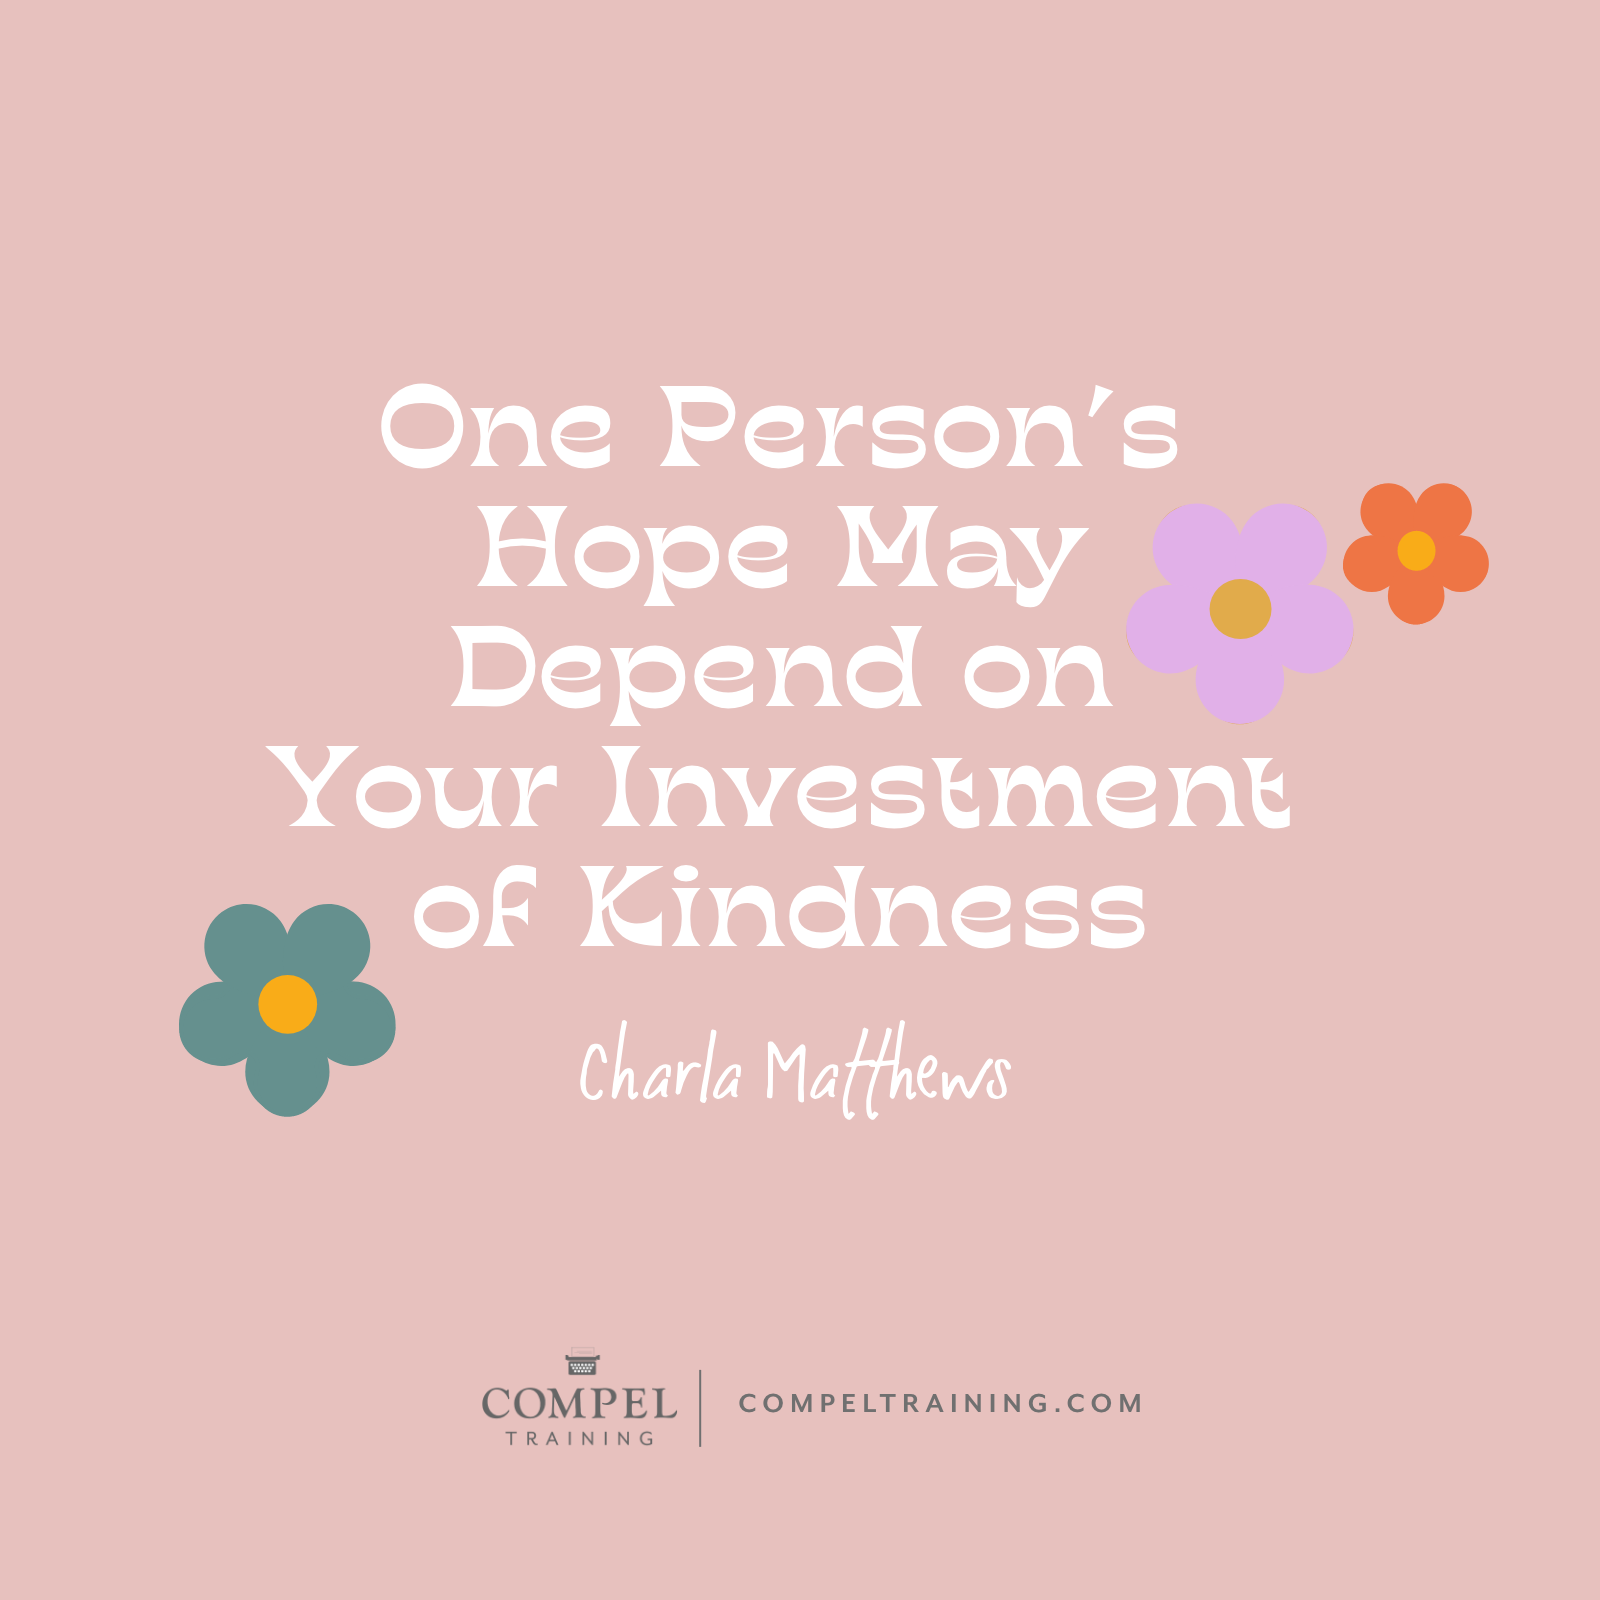 One Person's Hope May Depend on Your Investment of Kindness